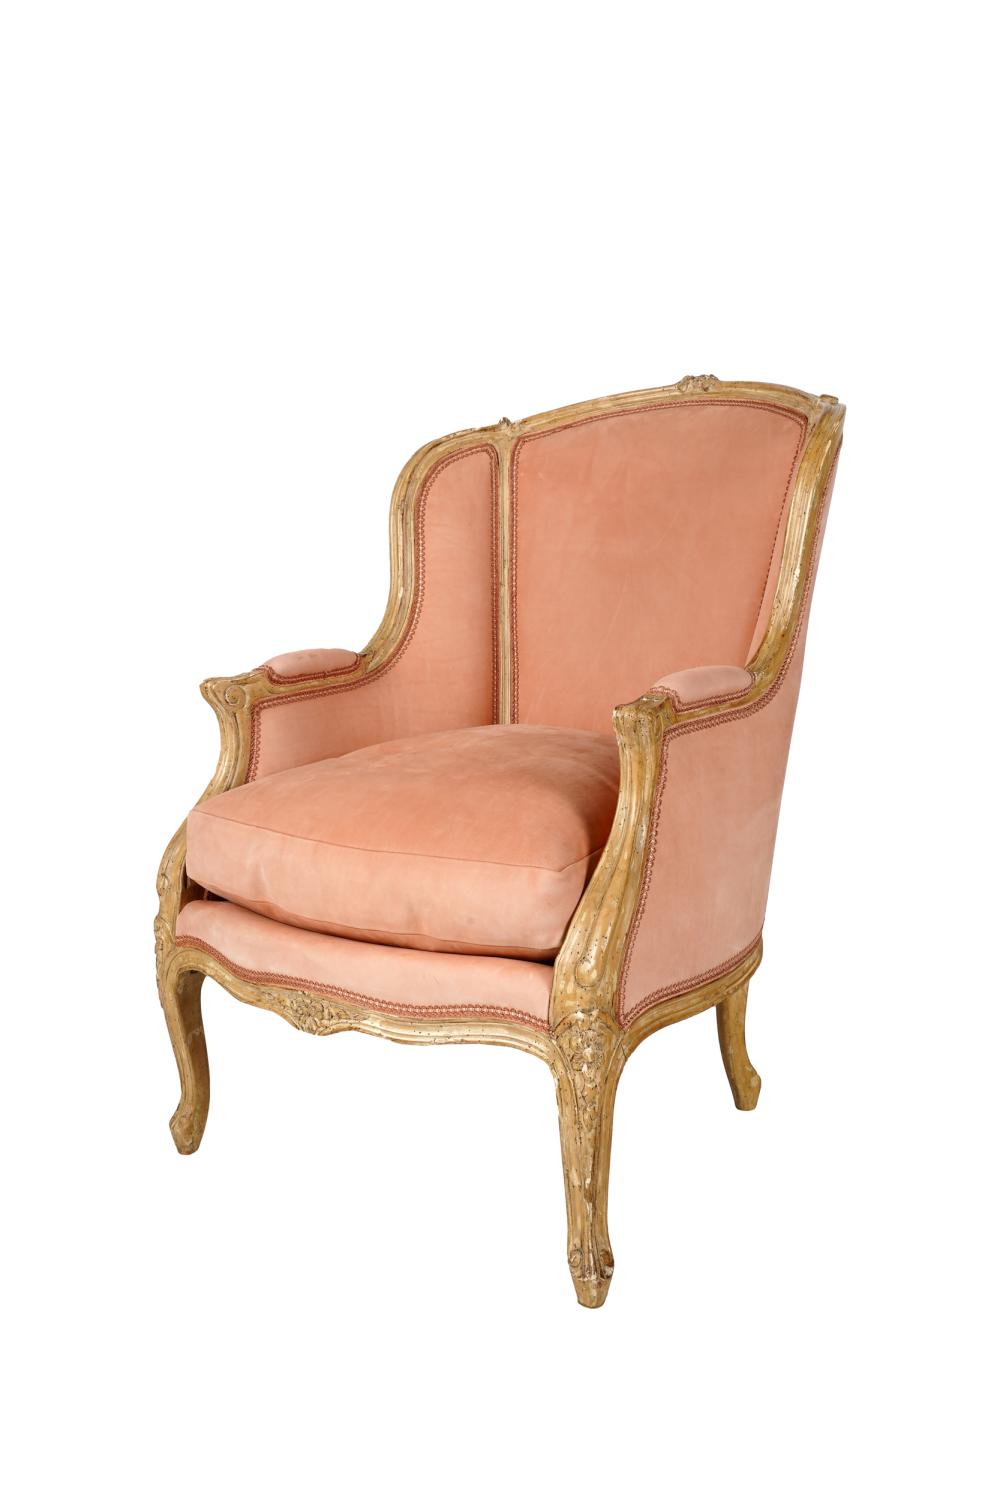 LOUIS XV STYLE BLEACHED WOOD BERGERE20th 3320c5